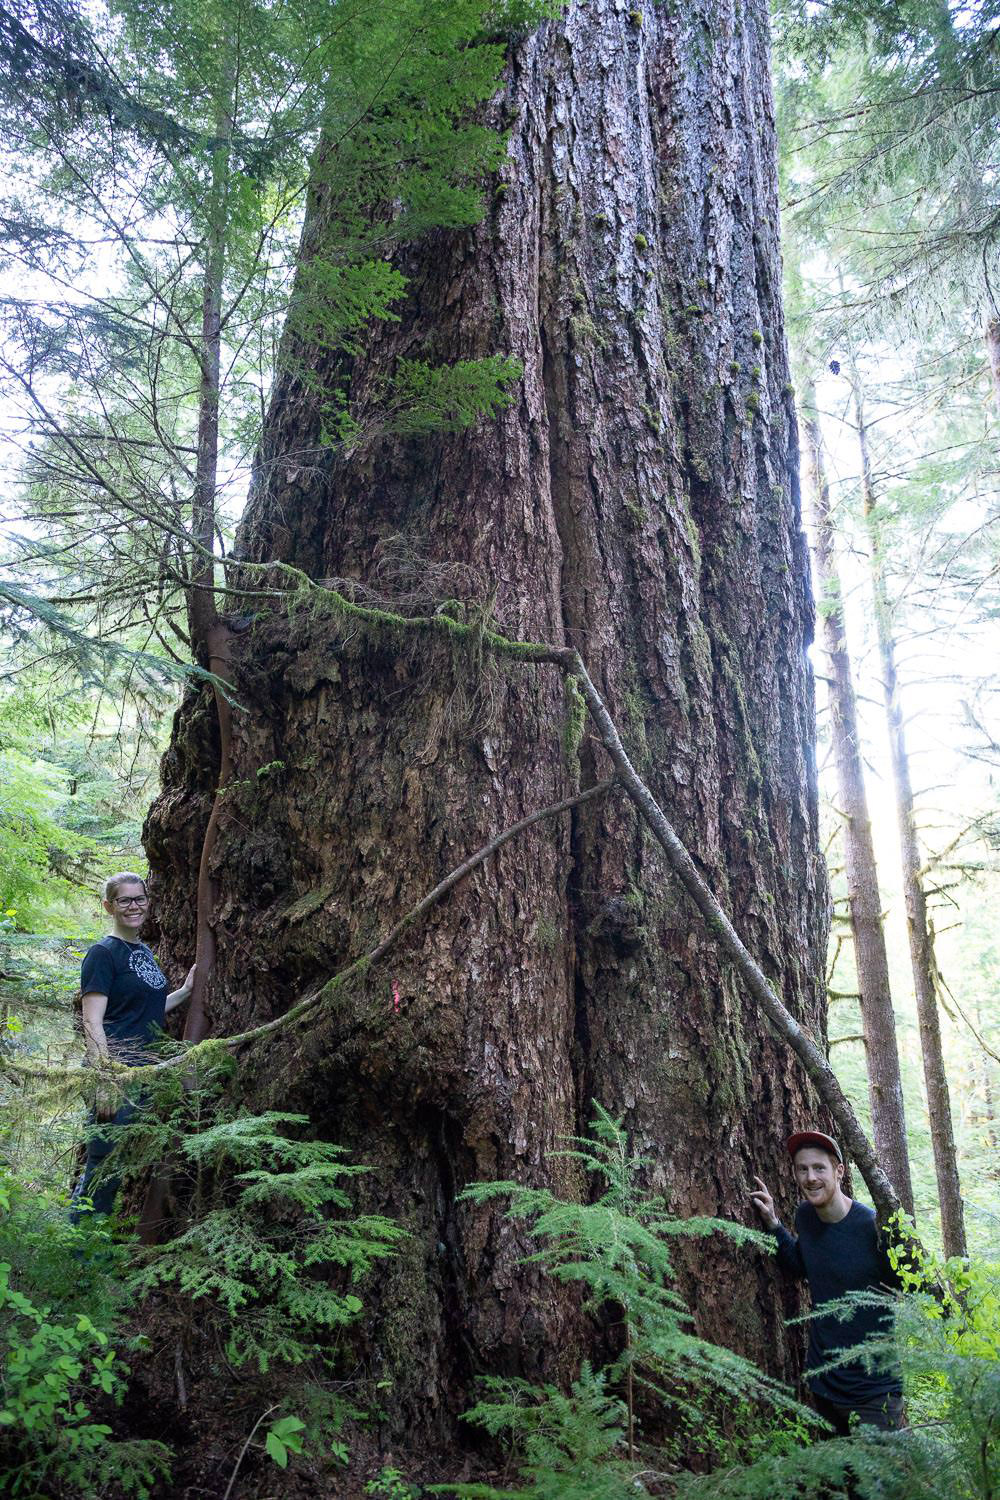 The Alberni Giant, Canada's 5th widest known Douglas-fir tree. This tree grows in the Nahmint Valley near Port Alberni. Sadly, a recently clearcut came to within 10-20 m of the tree.